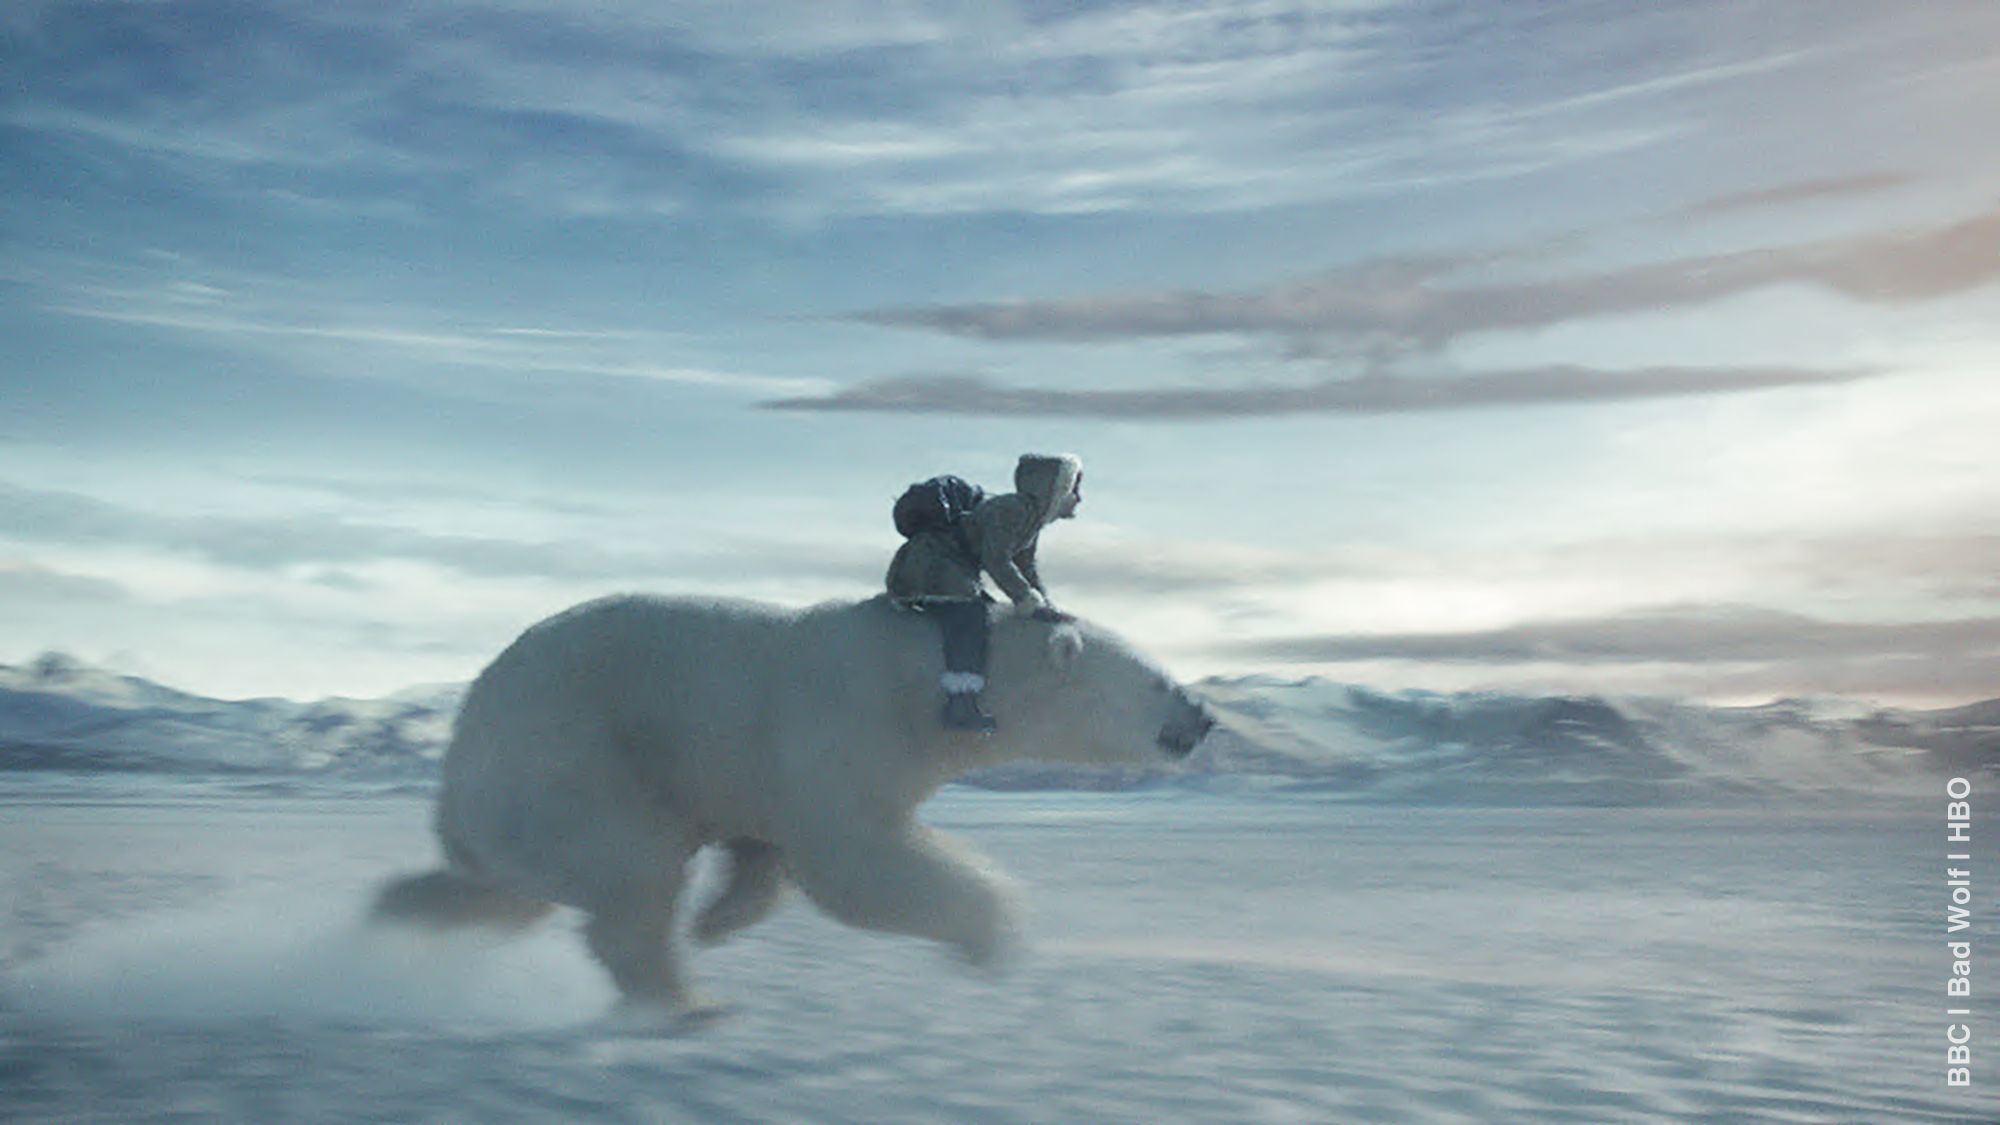 a girl rides on giant white bear in an icy landscape